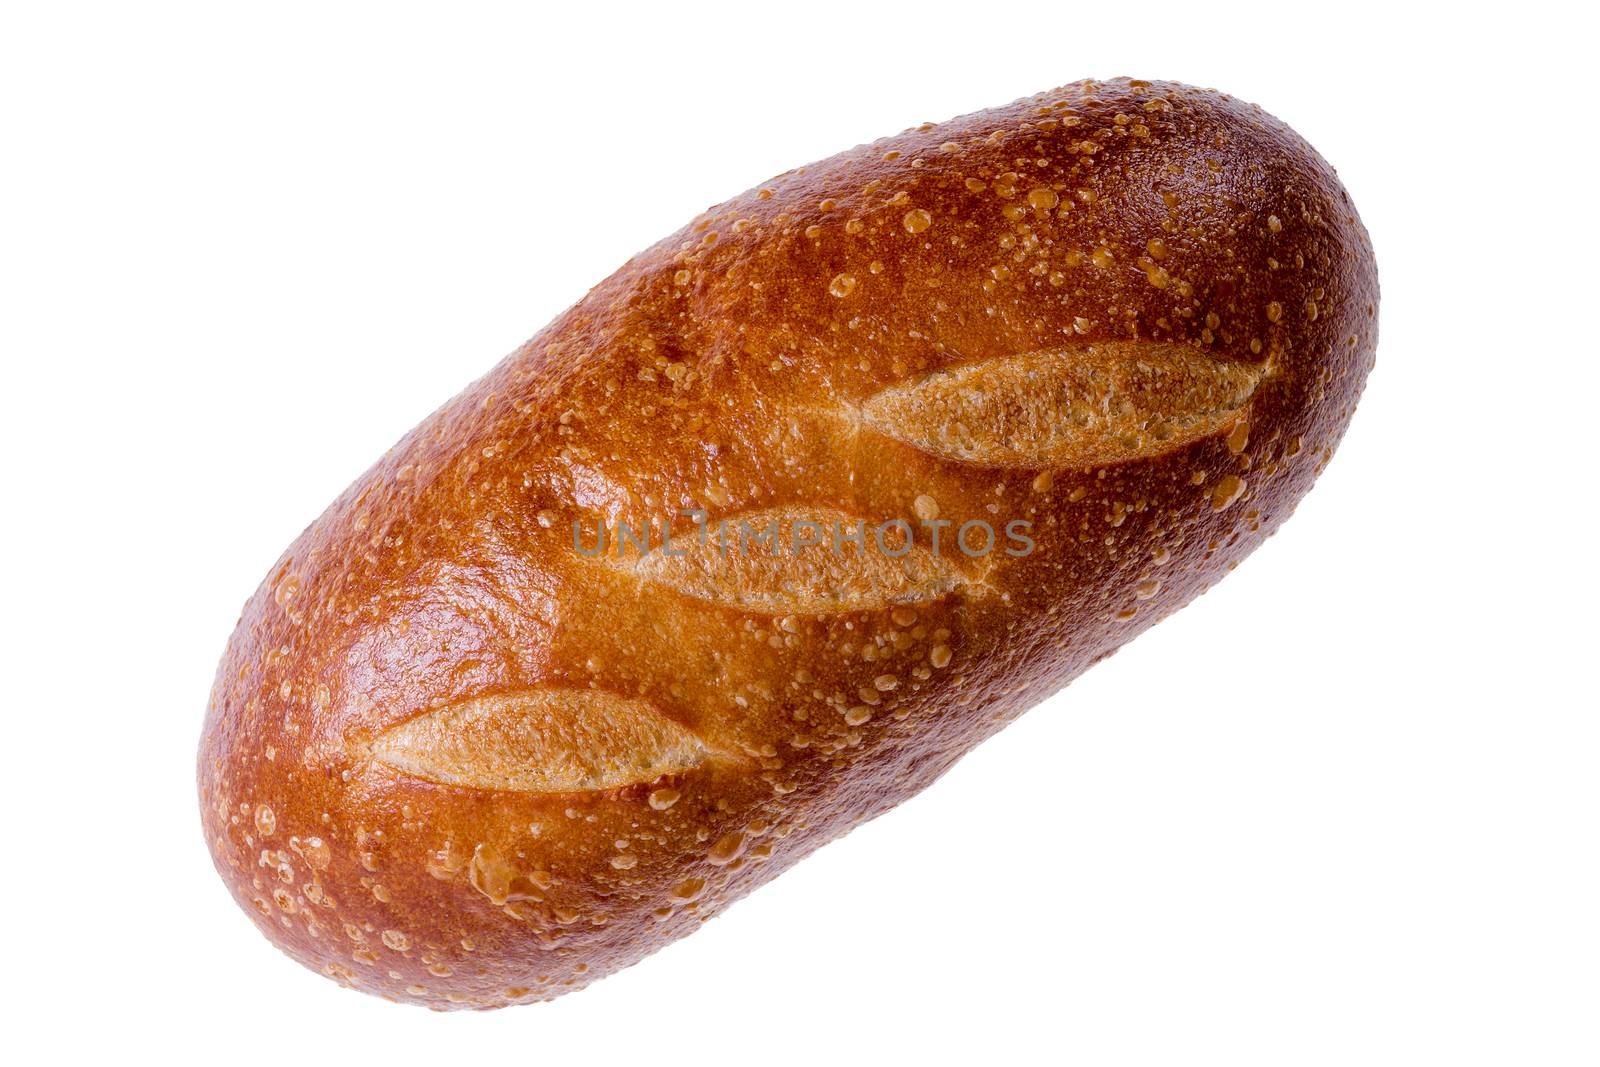 Rounded delicious crusty loaf of freshly baked sourdough bread isolated on white in a diagonal overhead view